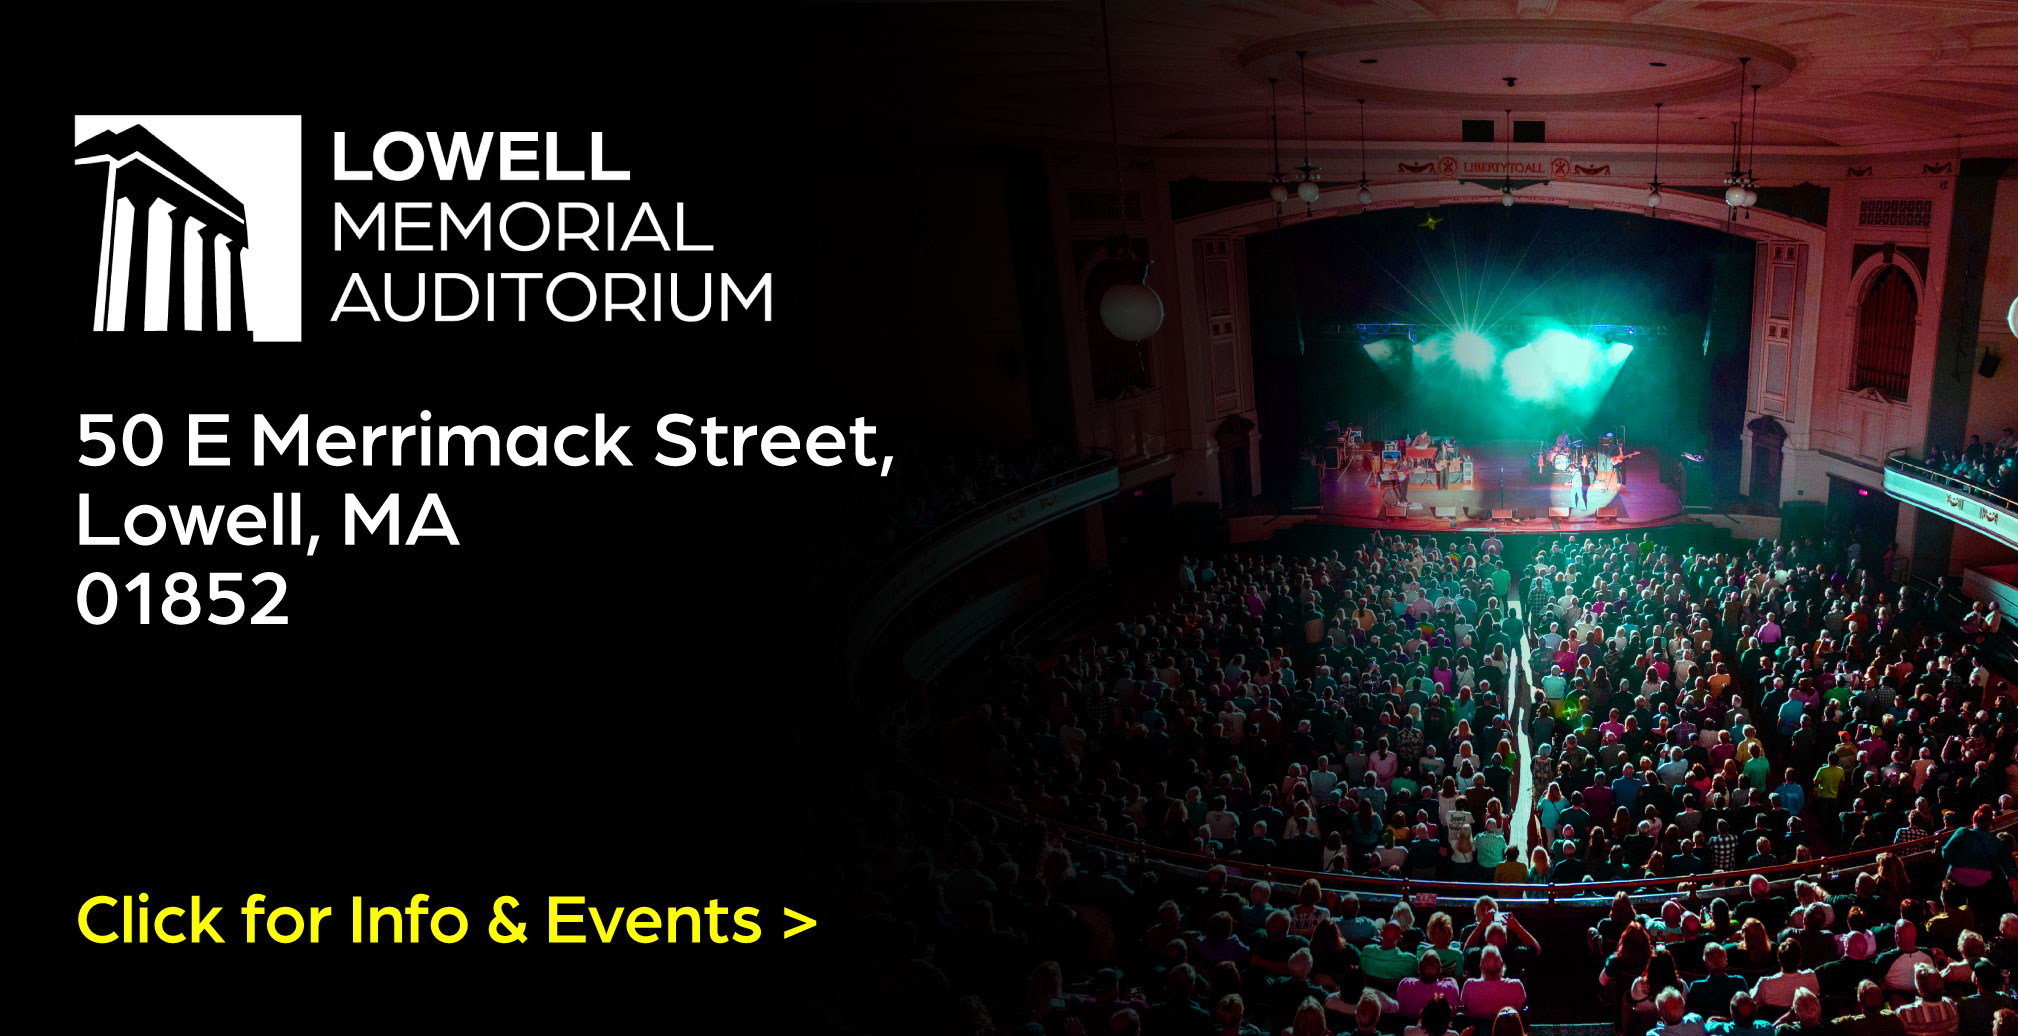 Learn more about Lowell Memorial Auditorium